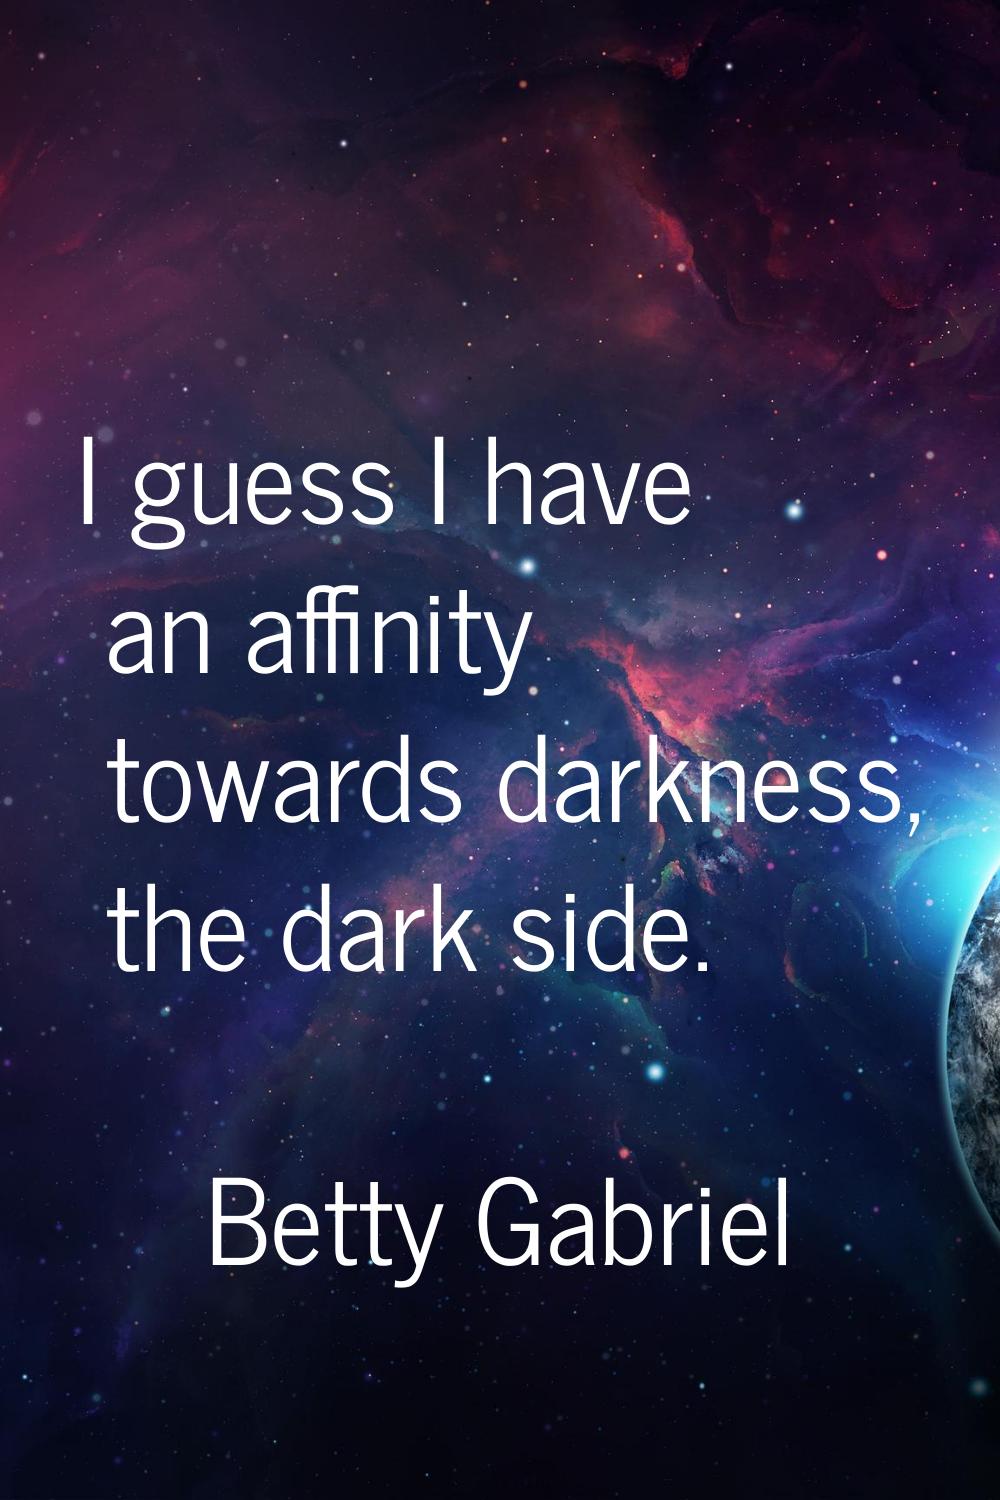 I guess I have an affinity towards darkness, the dark side.